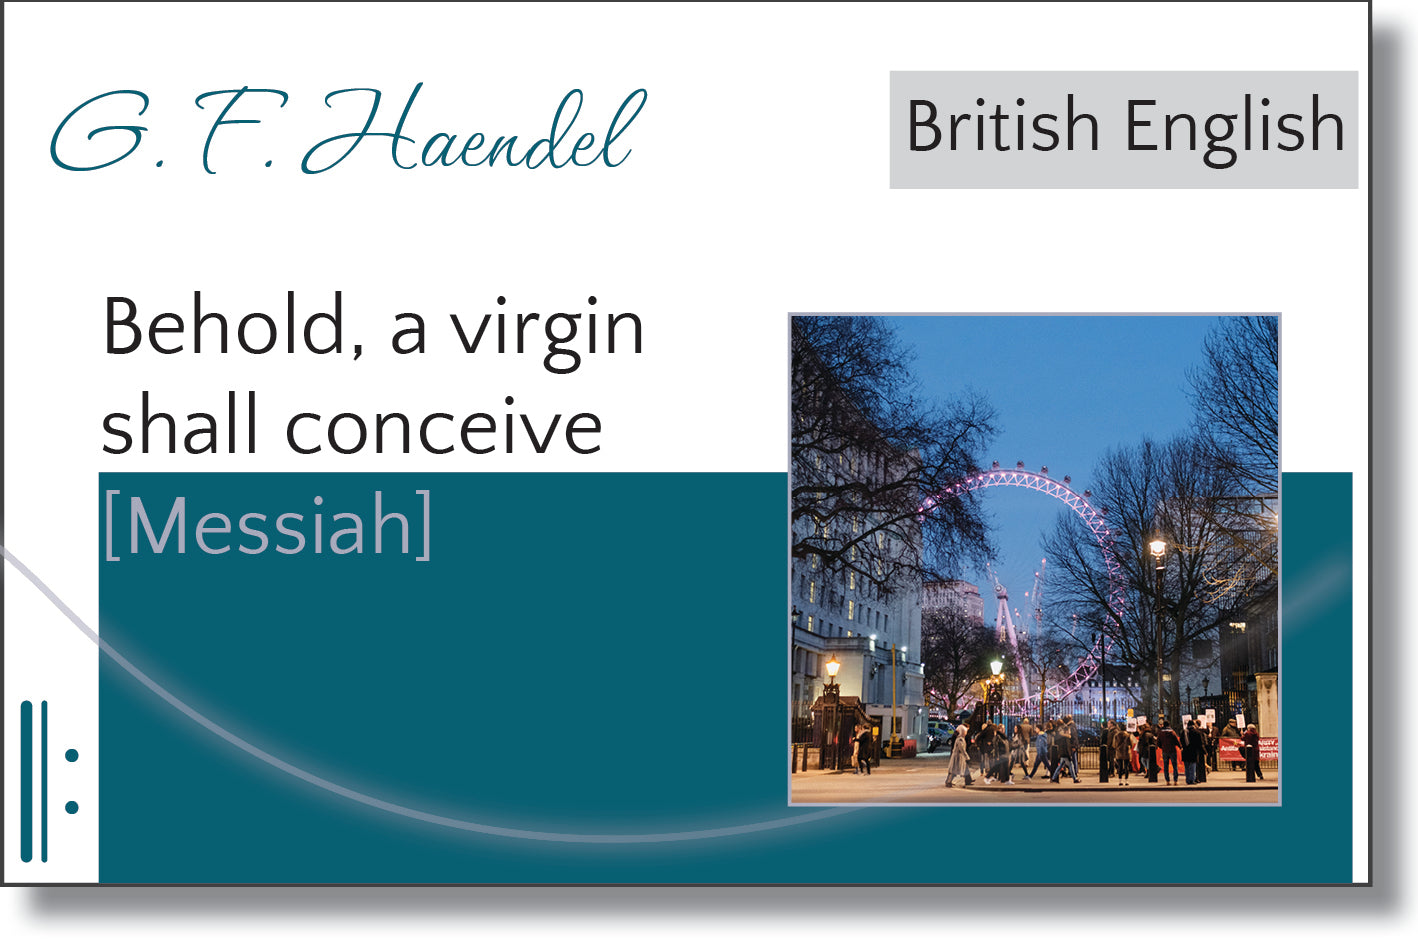 Messiah - Behold, a virgin shall conceive